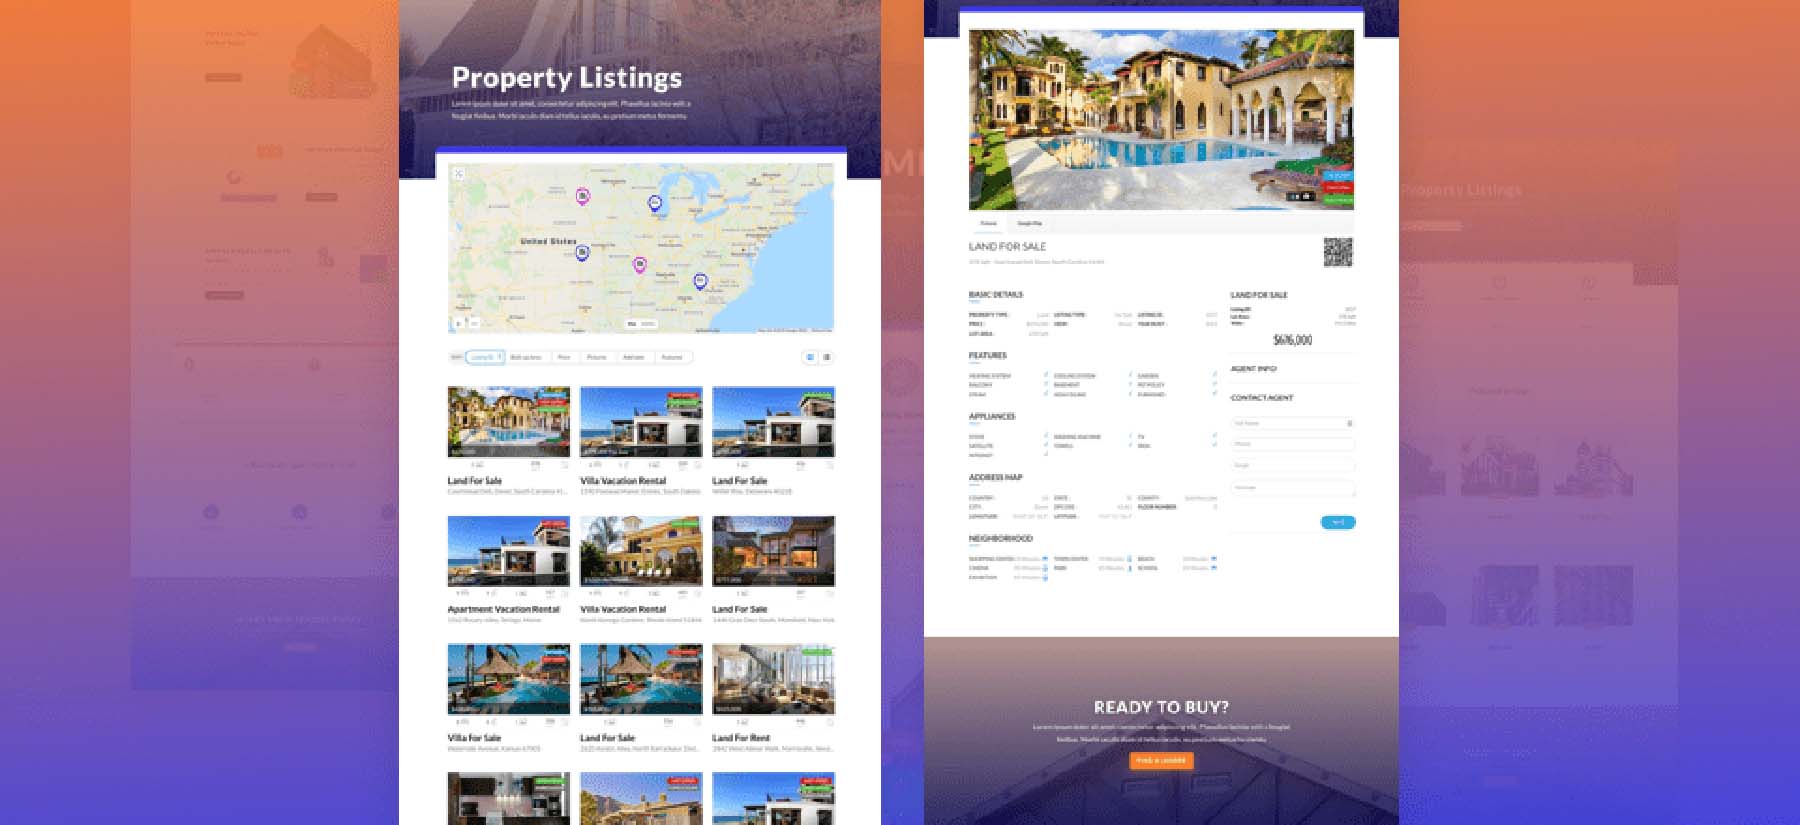 Divi, a powerful customizable theme to use for your real estate business